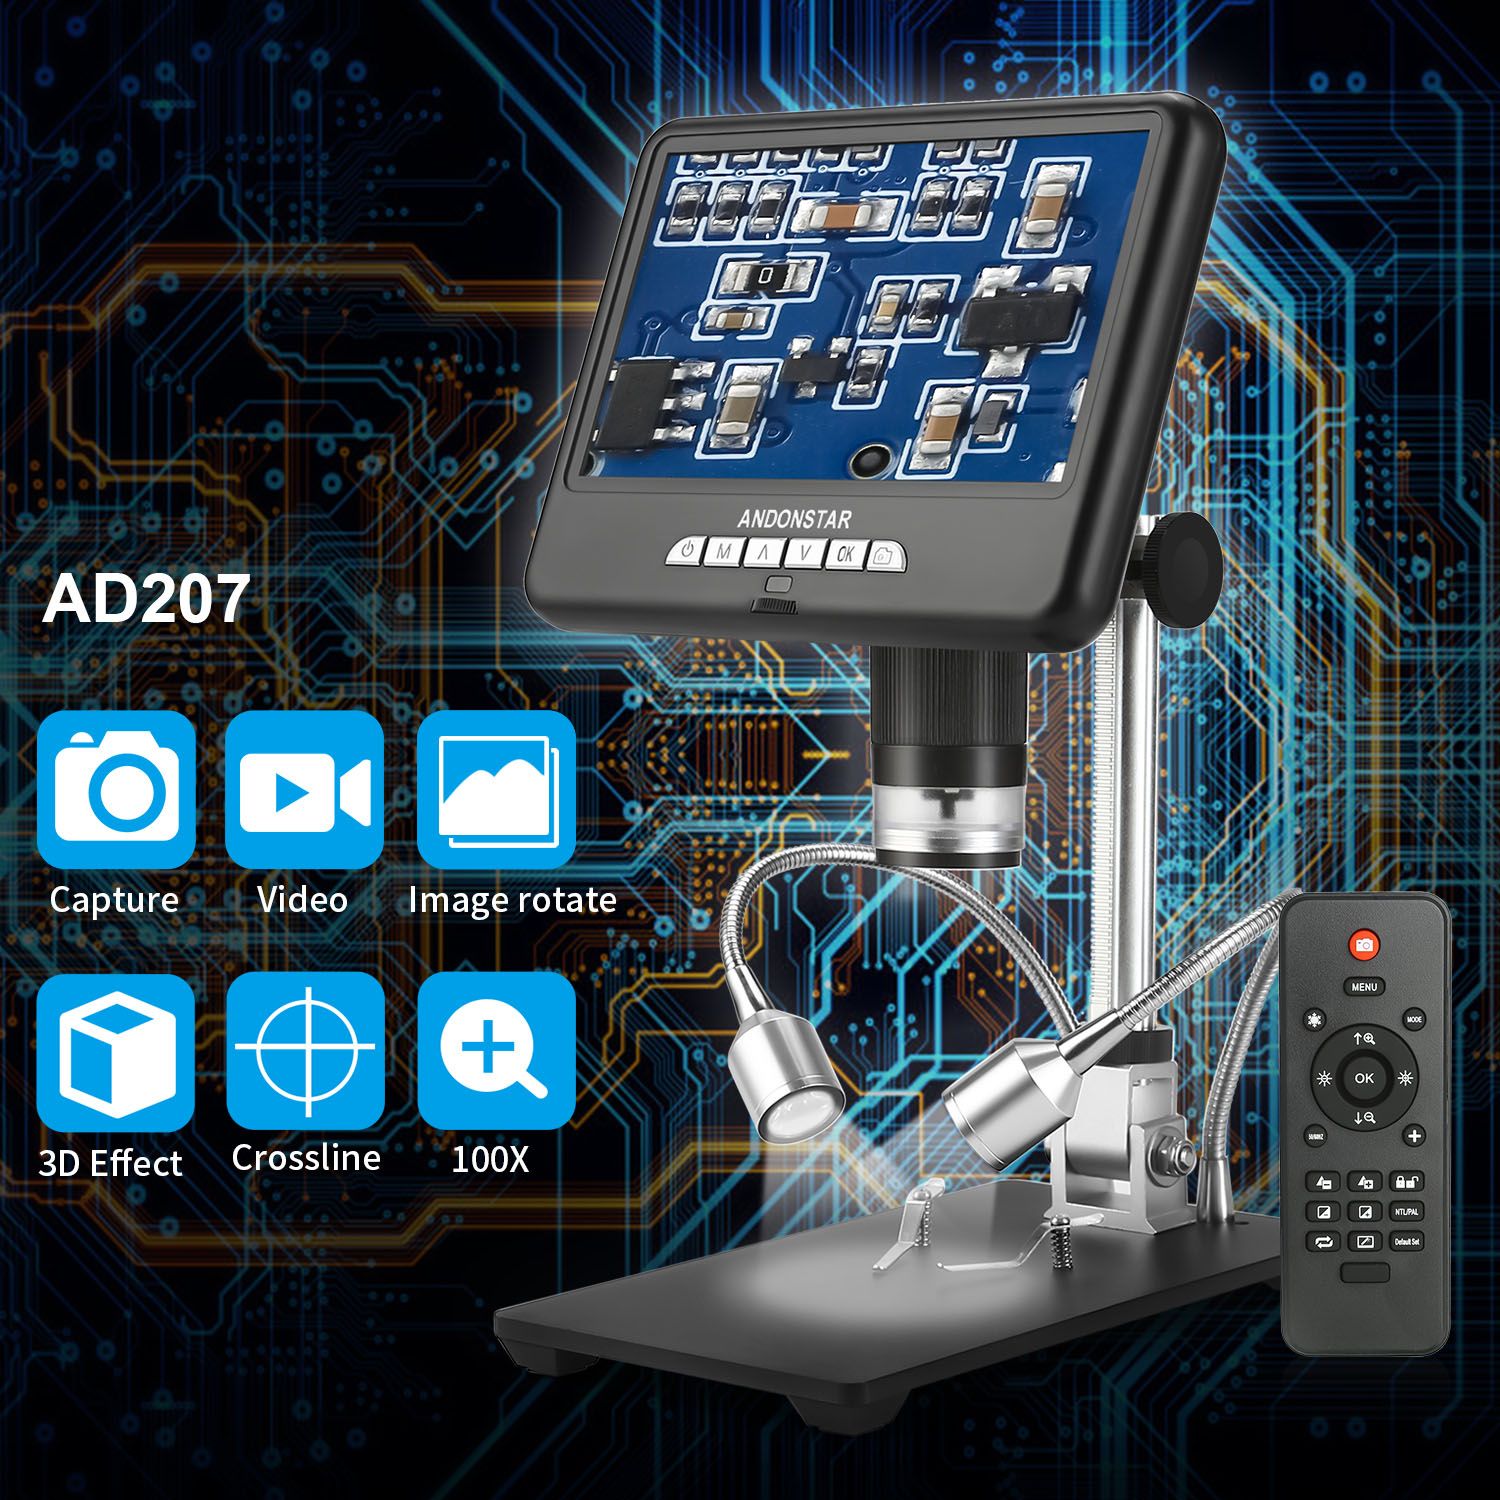 Andonstar-AD207-7-inch-3D-Digital-Microscope-Soldering-Tool-for-PhonePCBSMD-Repair-with-Image-Rotate-1584320